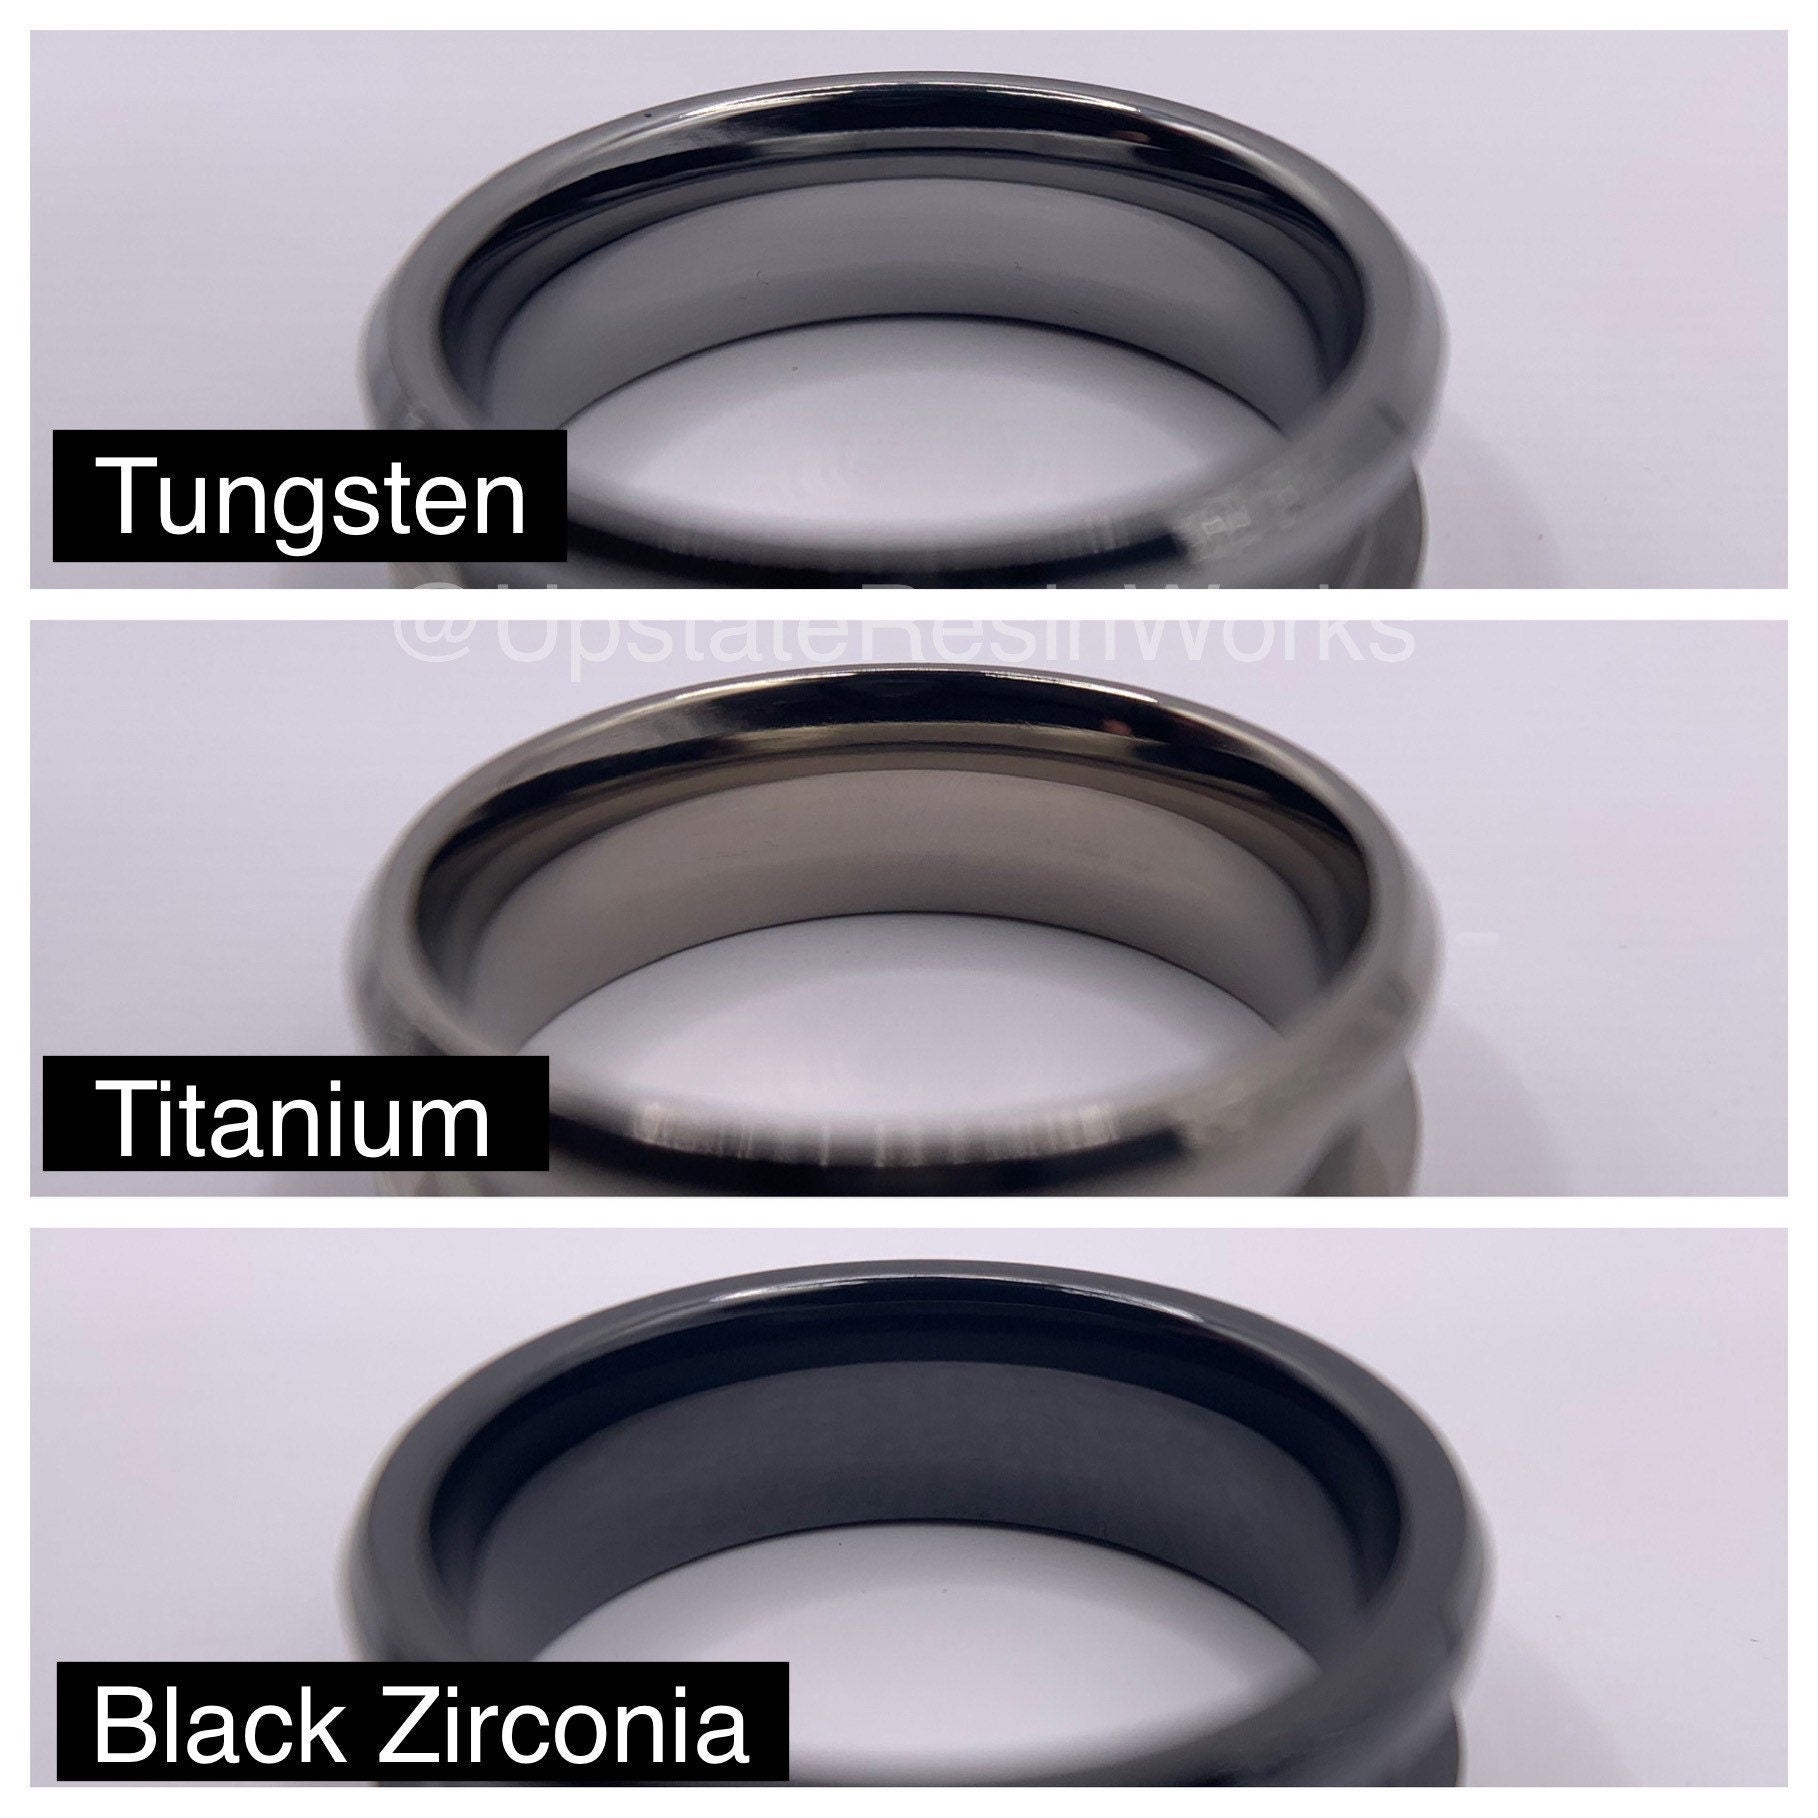 What are the differences between Titanium and Tungsten?